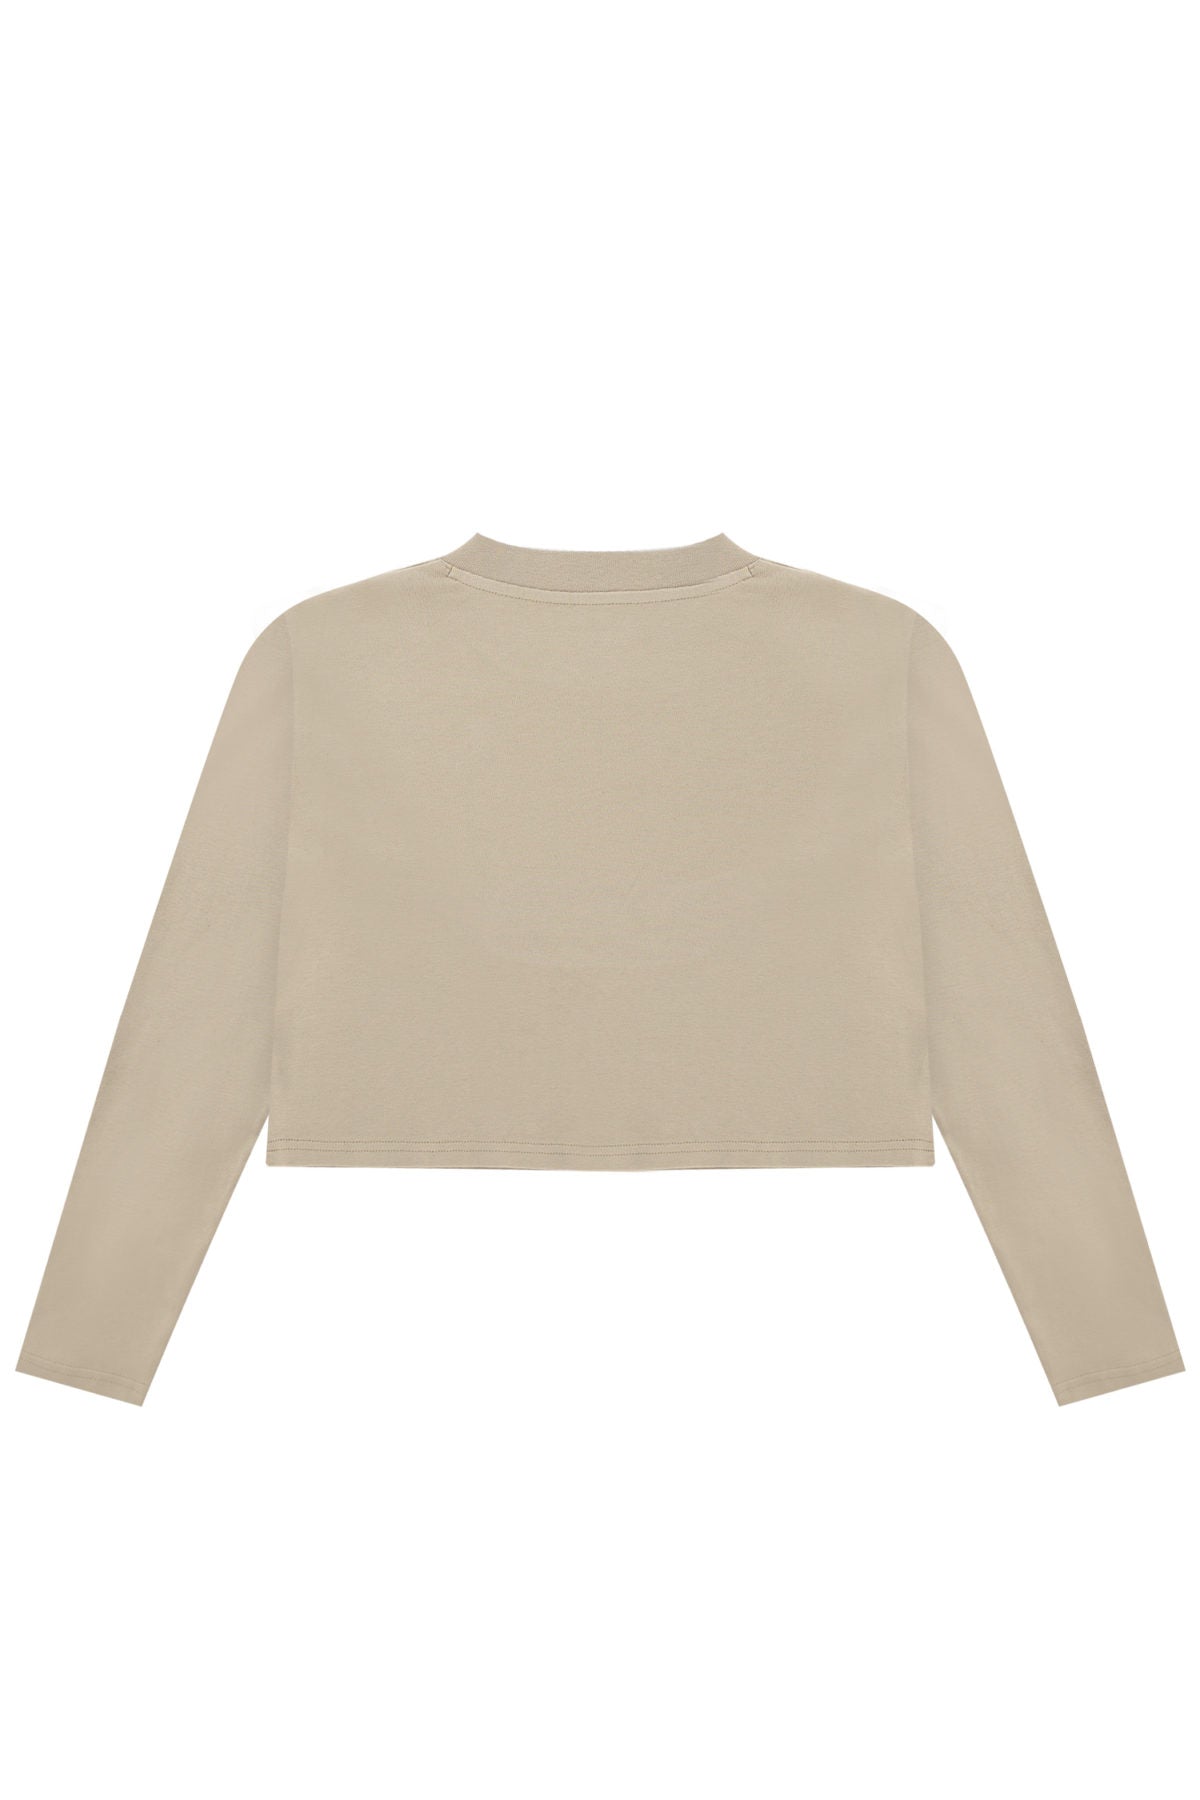 Load image into Gallery viewer, Cotton Crop Long Sleeve T-Shirt - Beige
